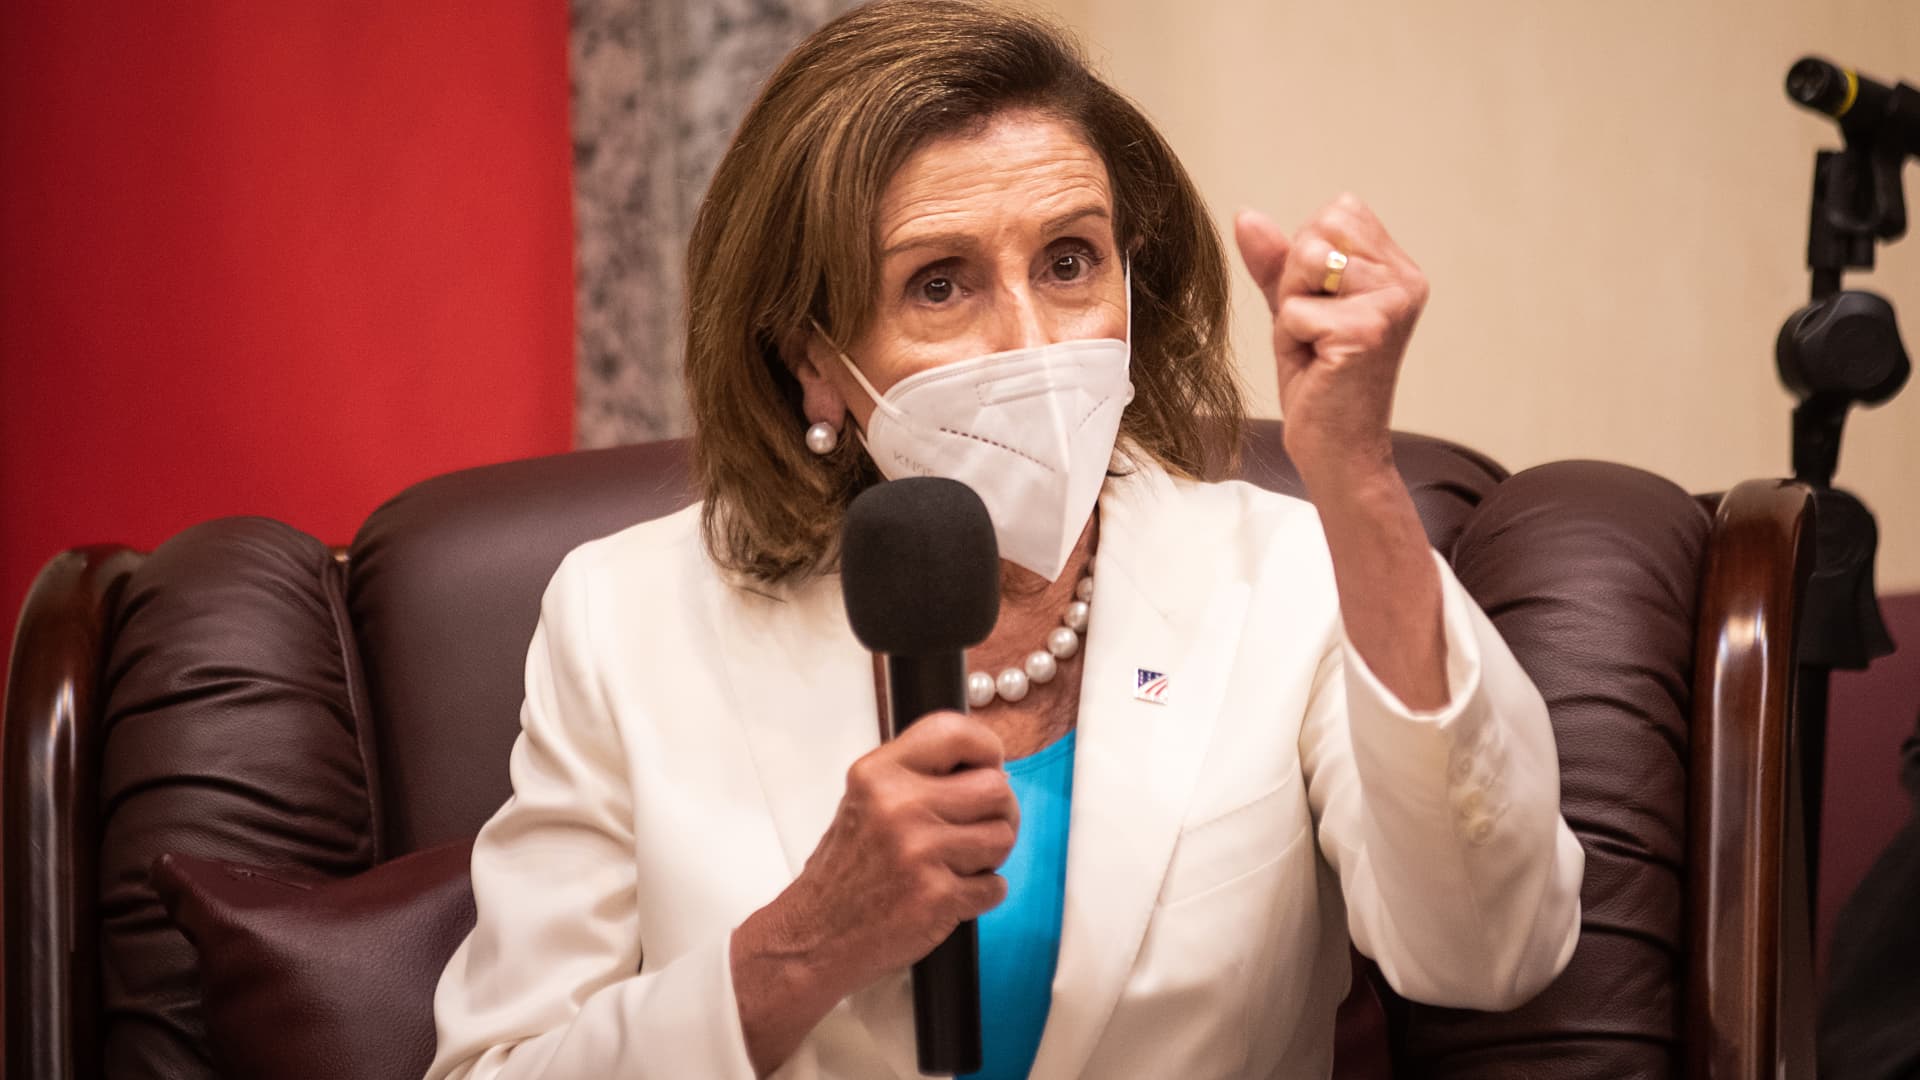 Speaker of the U.S. House Of Representatives Nancy Pelosi, attending a meeting at the Legislative Yuan, Taiwan's house of parliament on August 3, 2022. Photo by via Getty Images)